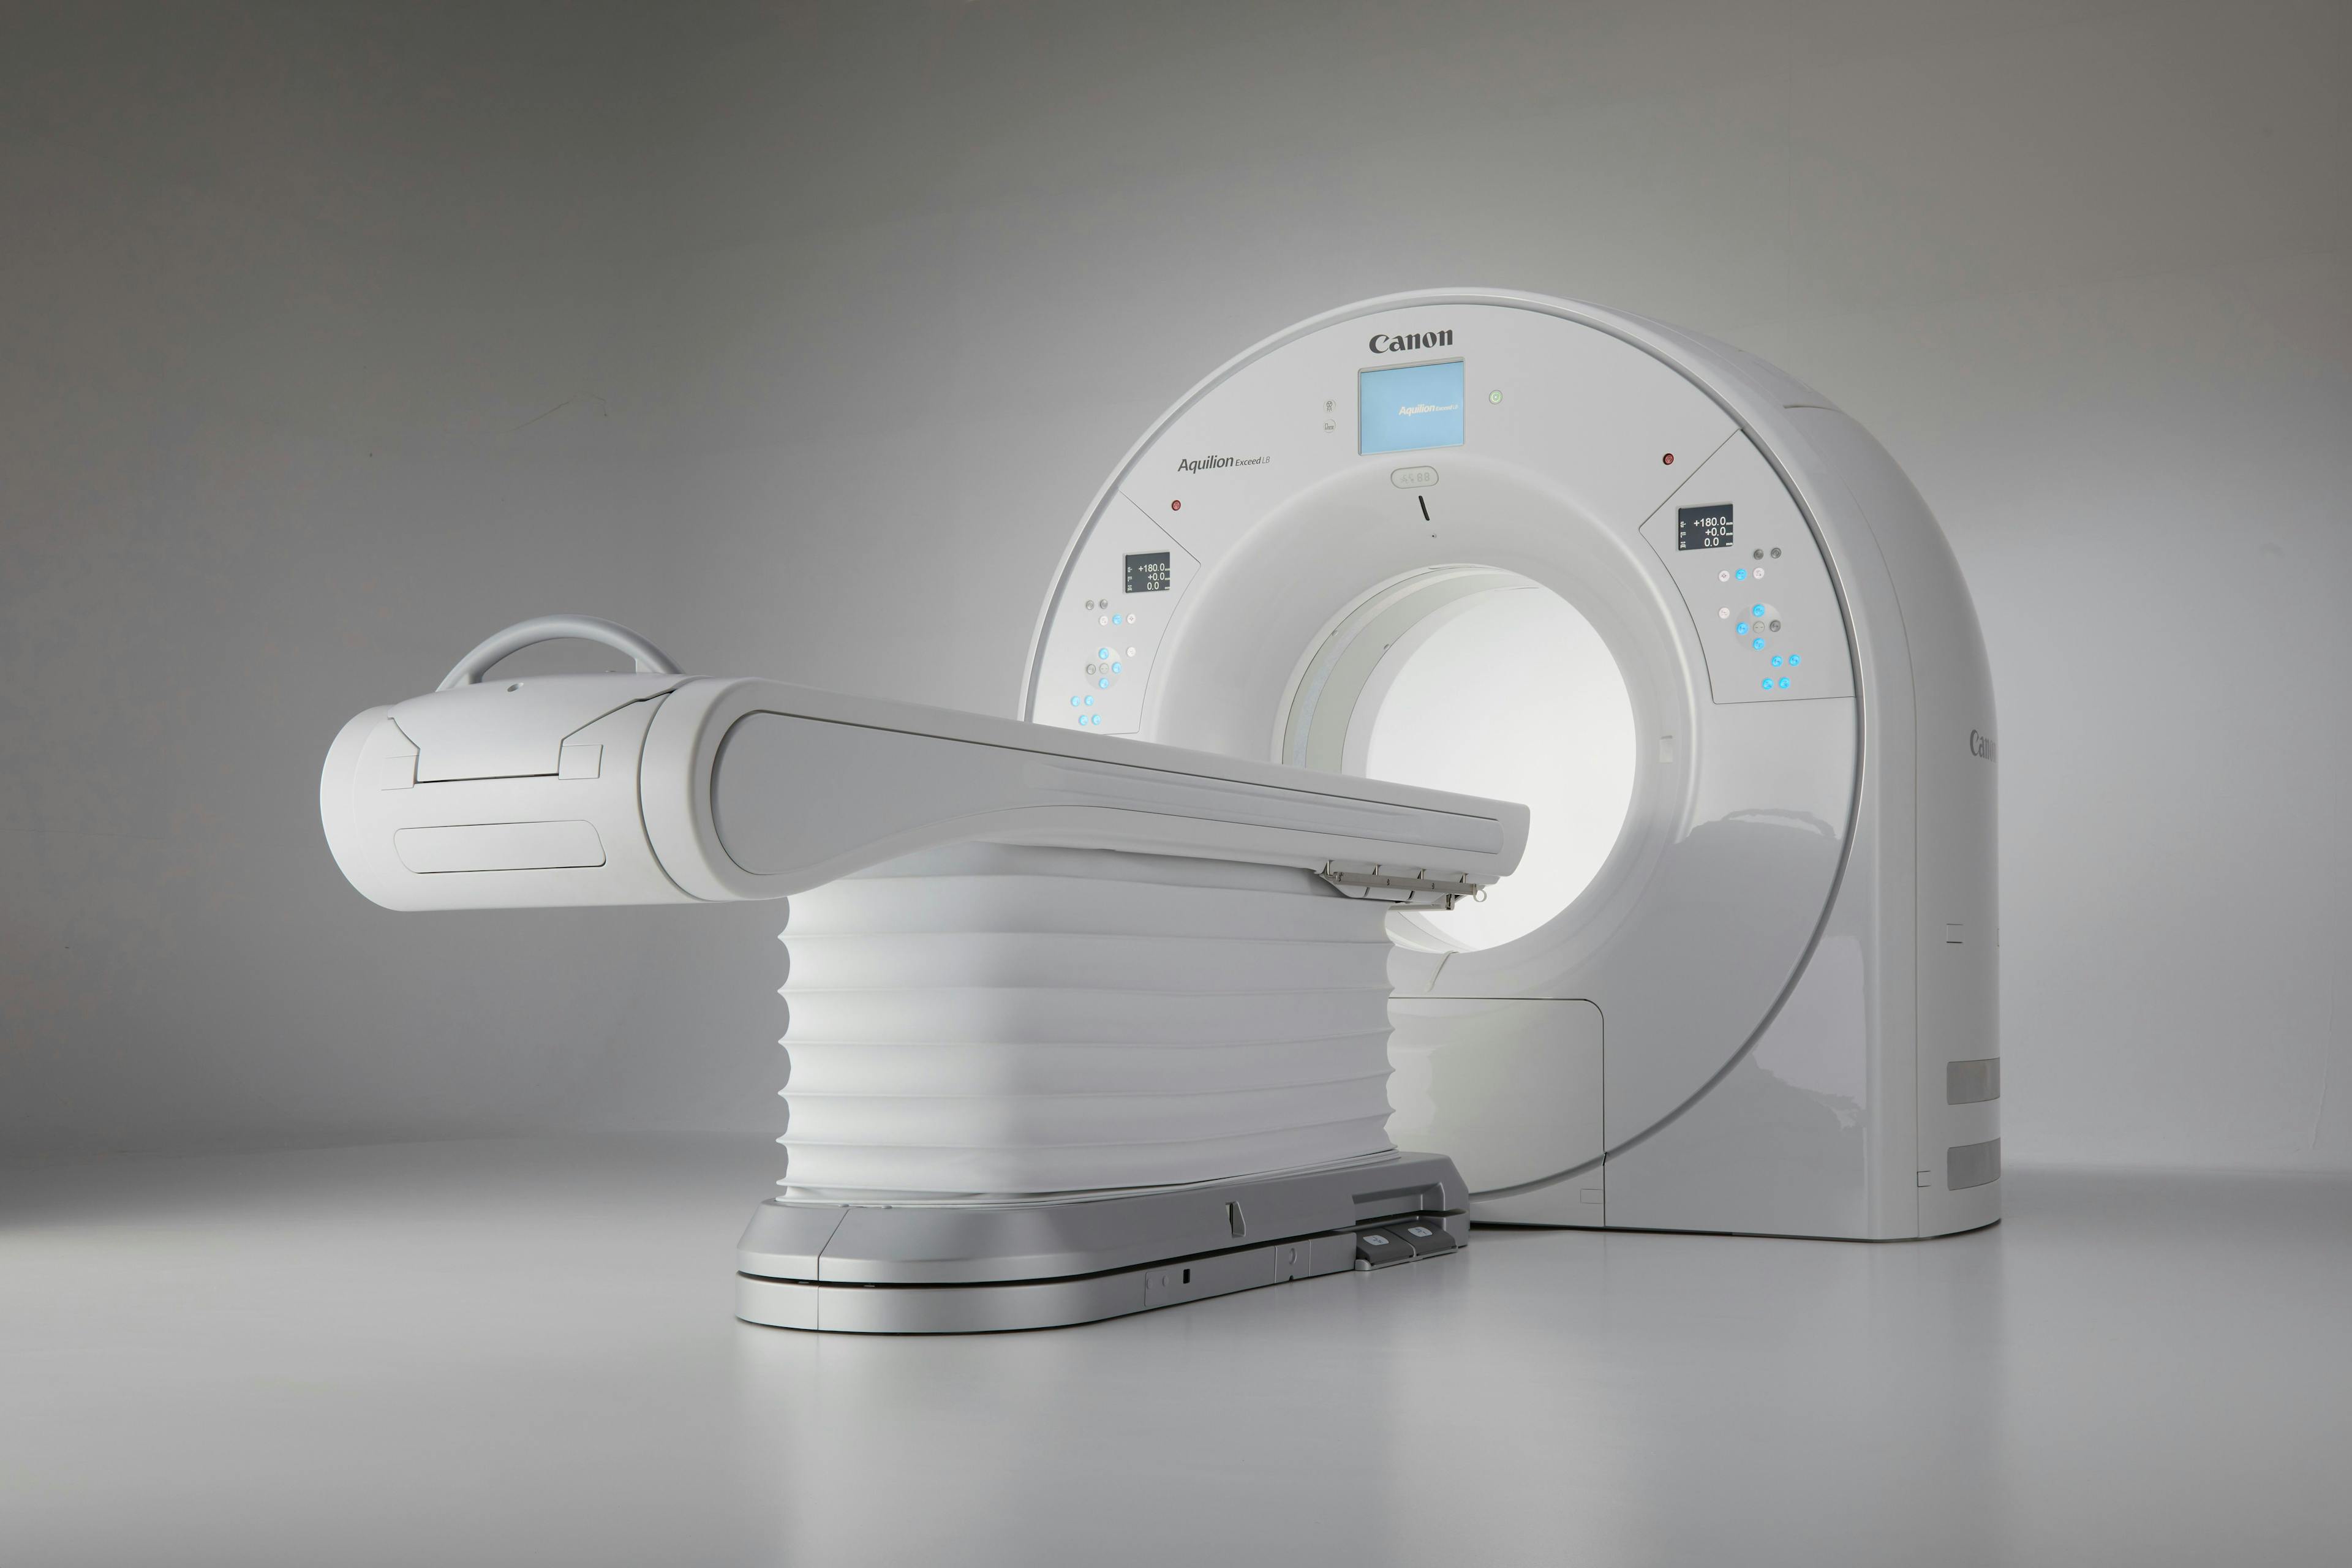 FDA Clears Canon Medical's AI-Powered Large-Bore CT